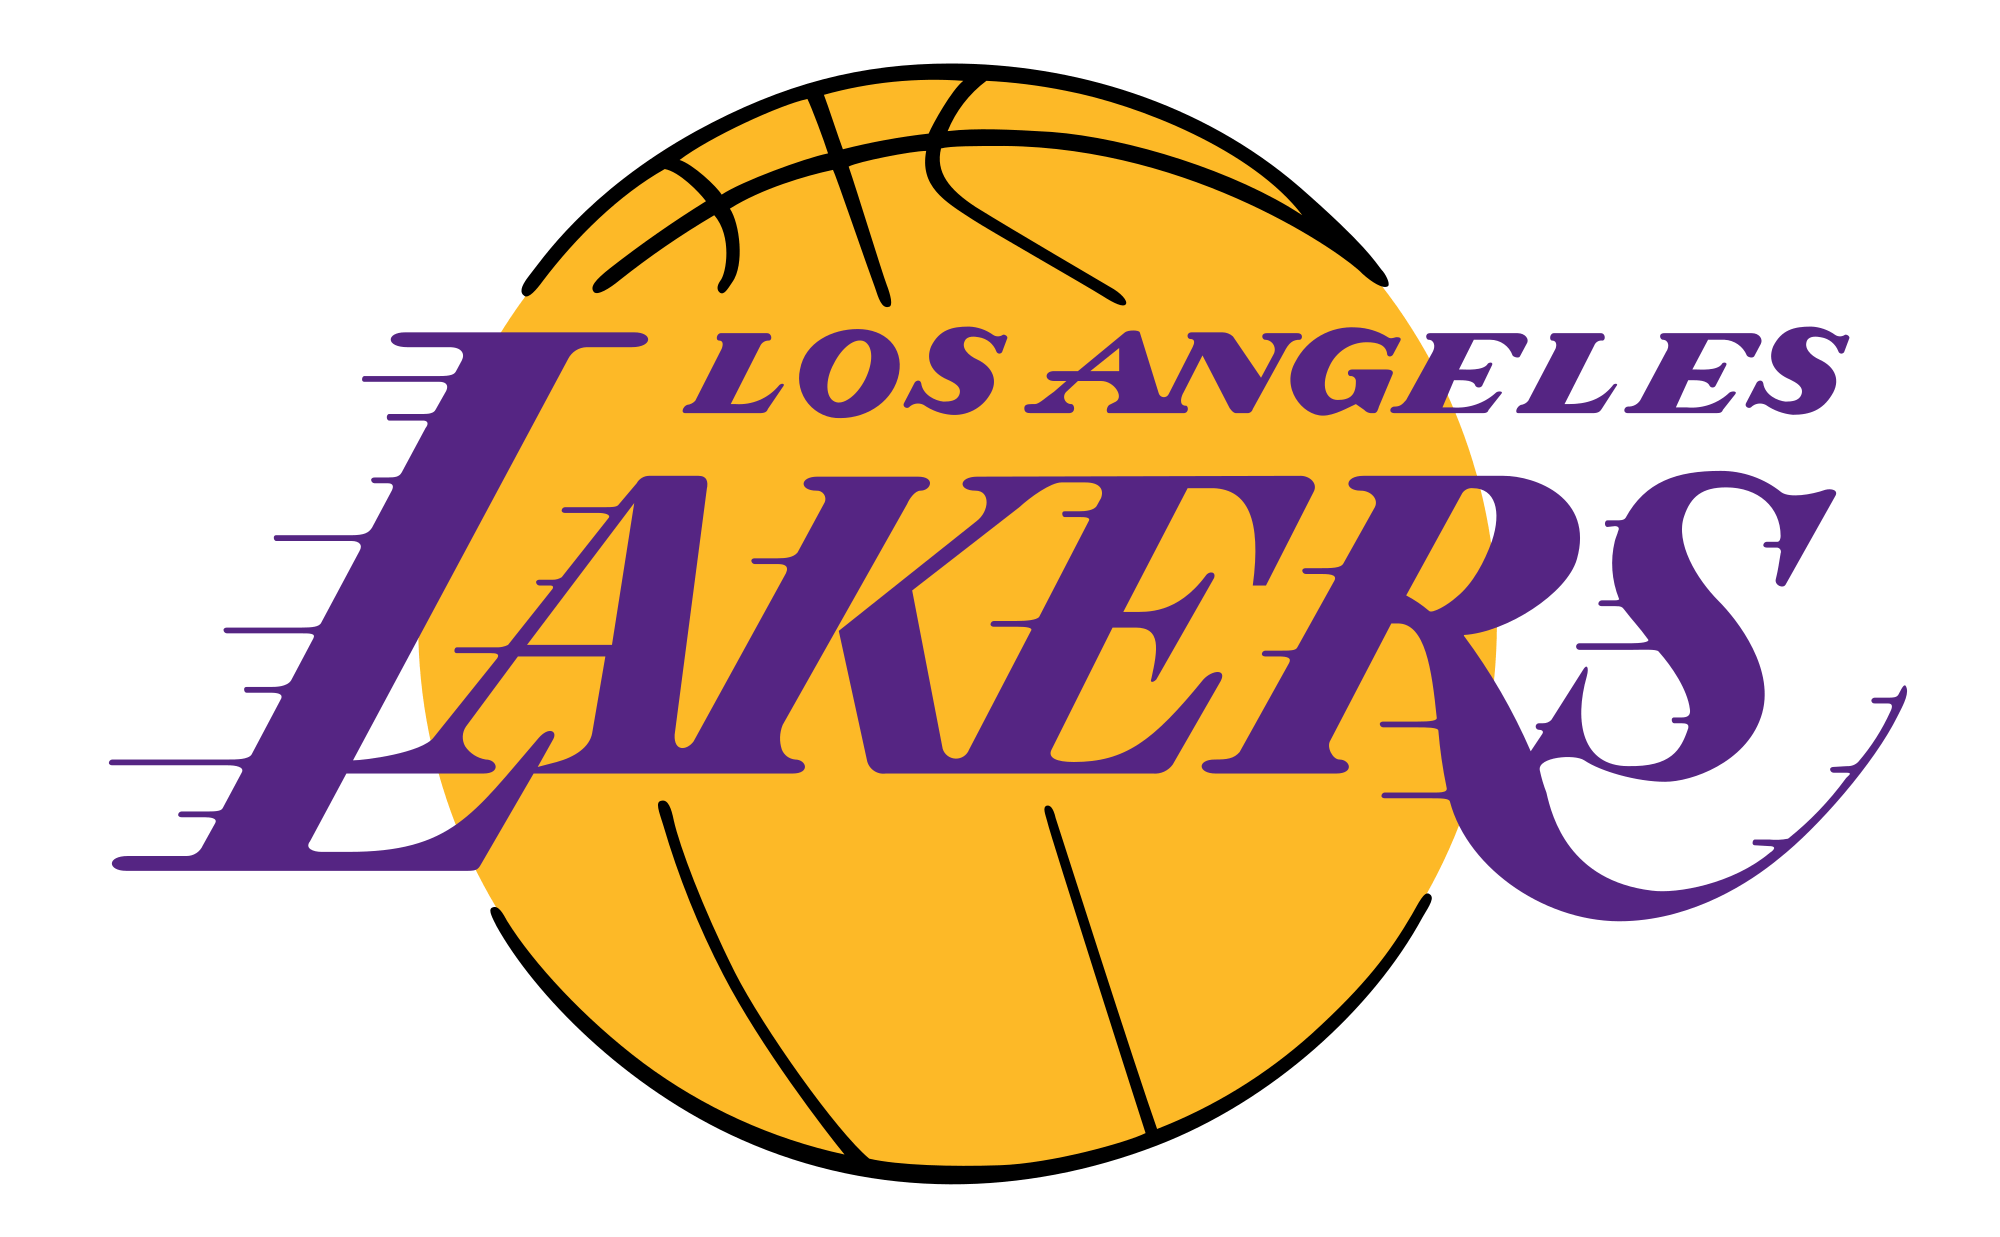 Los Angeles Lakers Logo - File:Los Angeles Lakers logo.svg - Wikimedia Commons